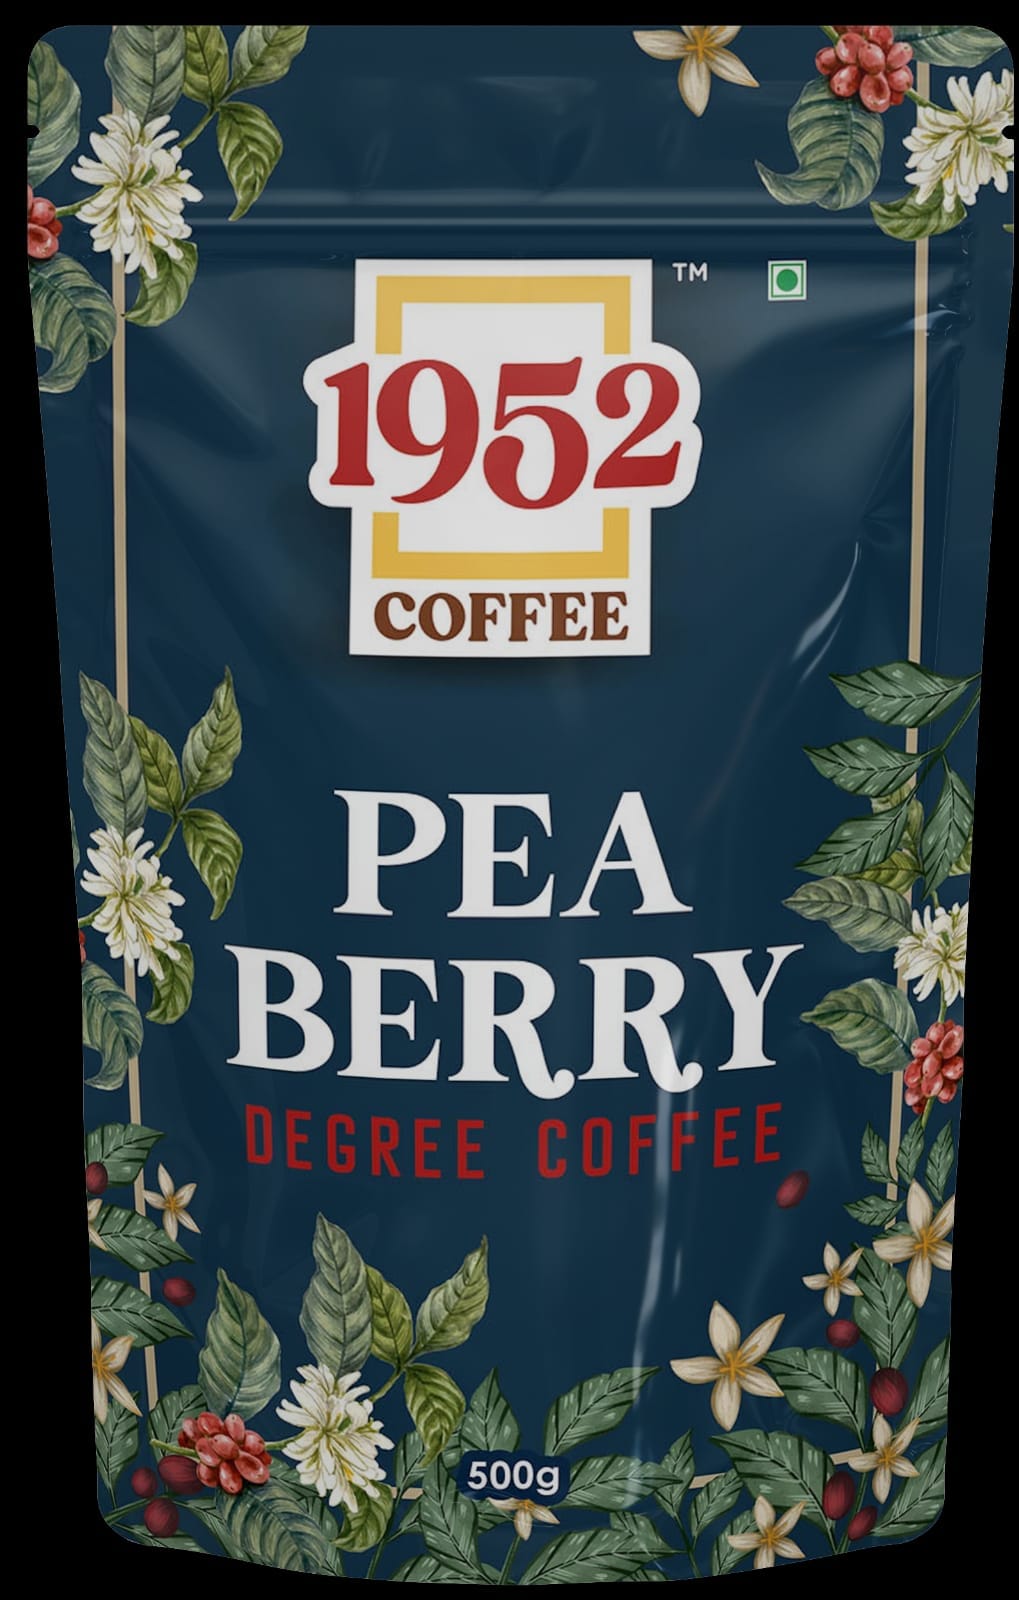 Pea Berry Filter Coffee(80%PeaBerry Coffee -20%Chicory)-1952 Coffee